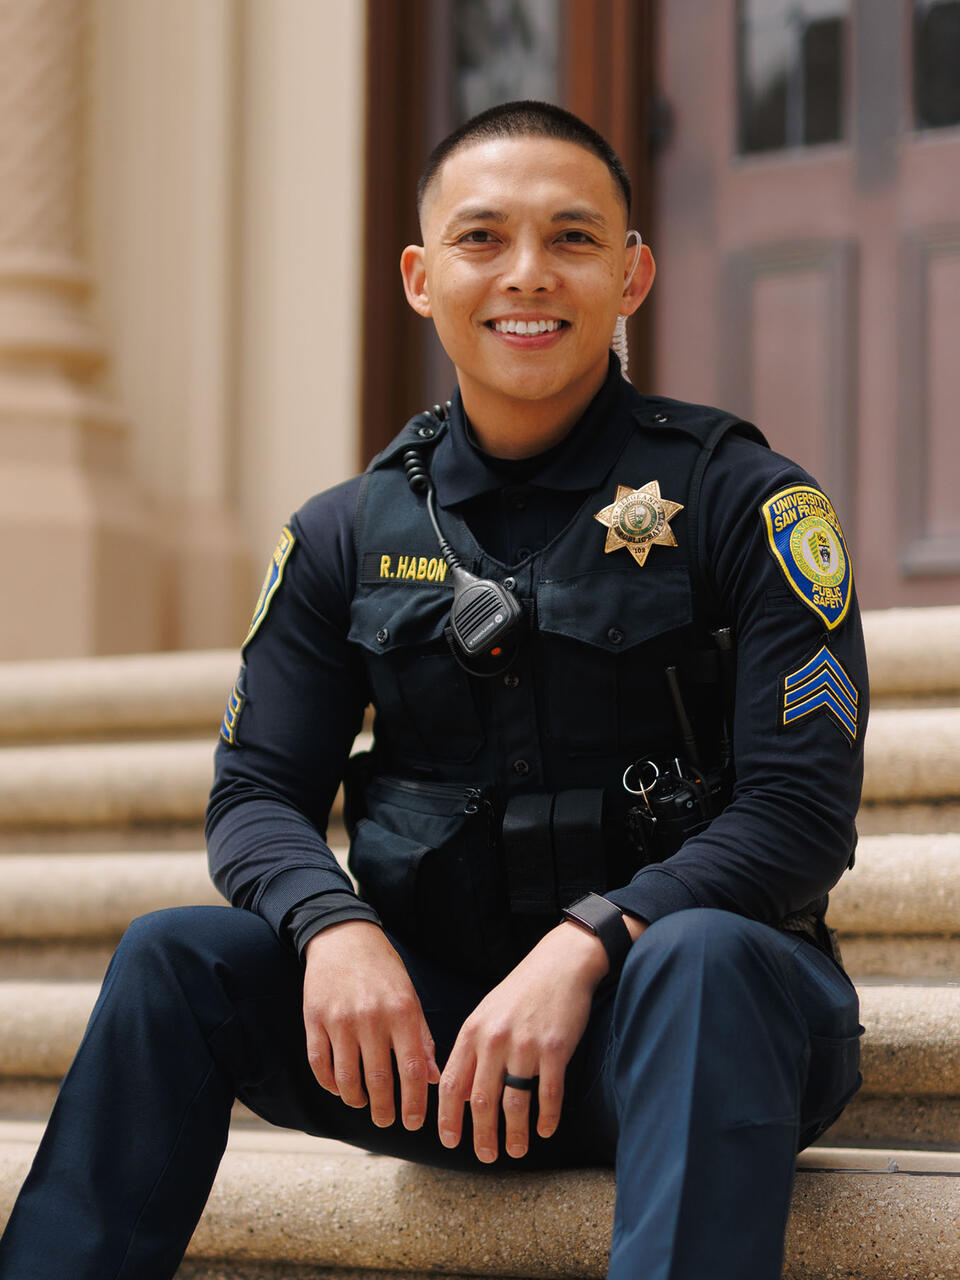 Public Safety officer seated on stairs